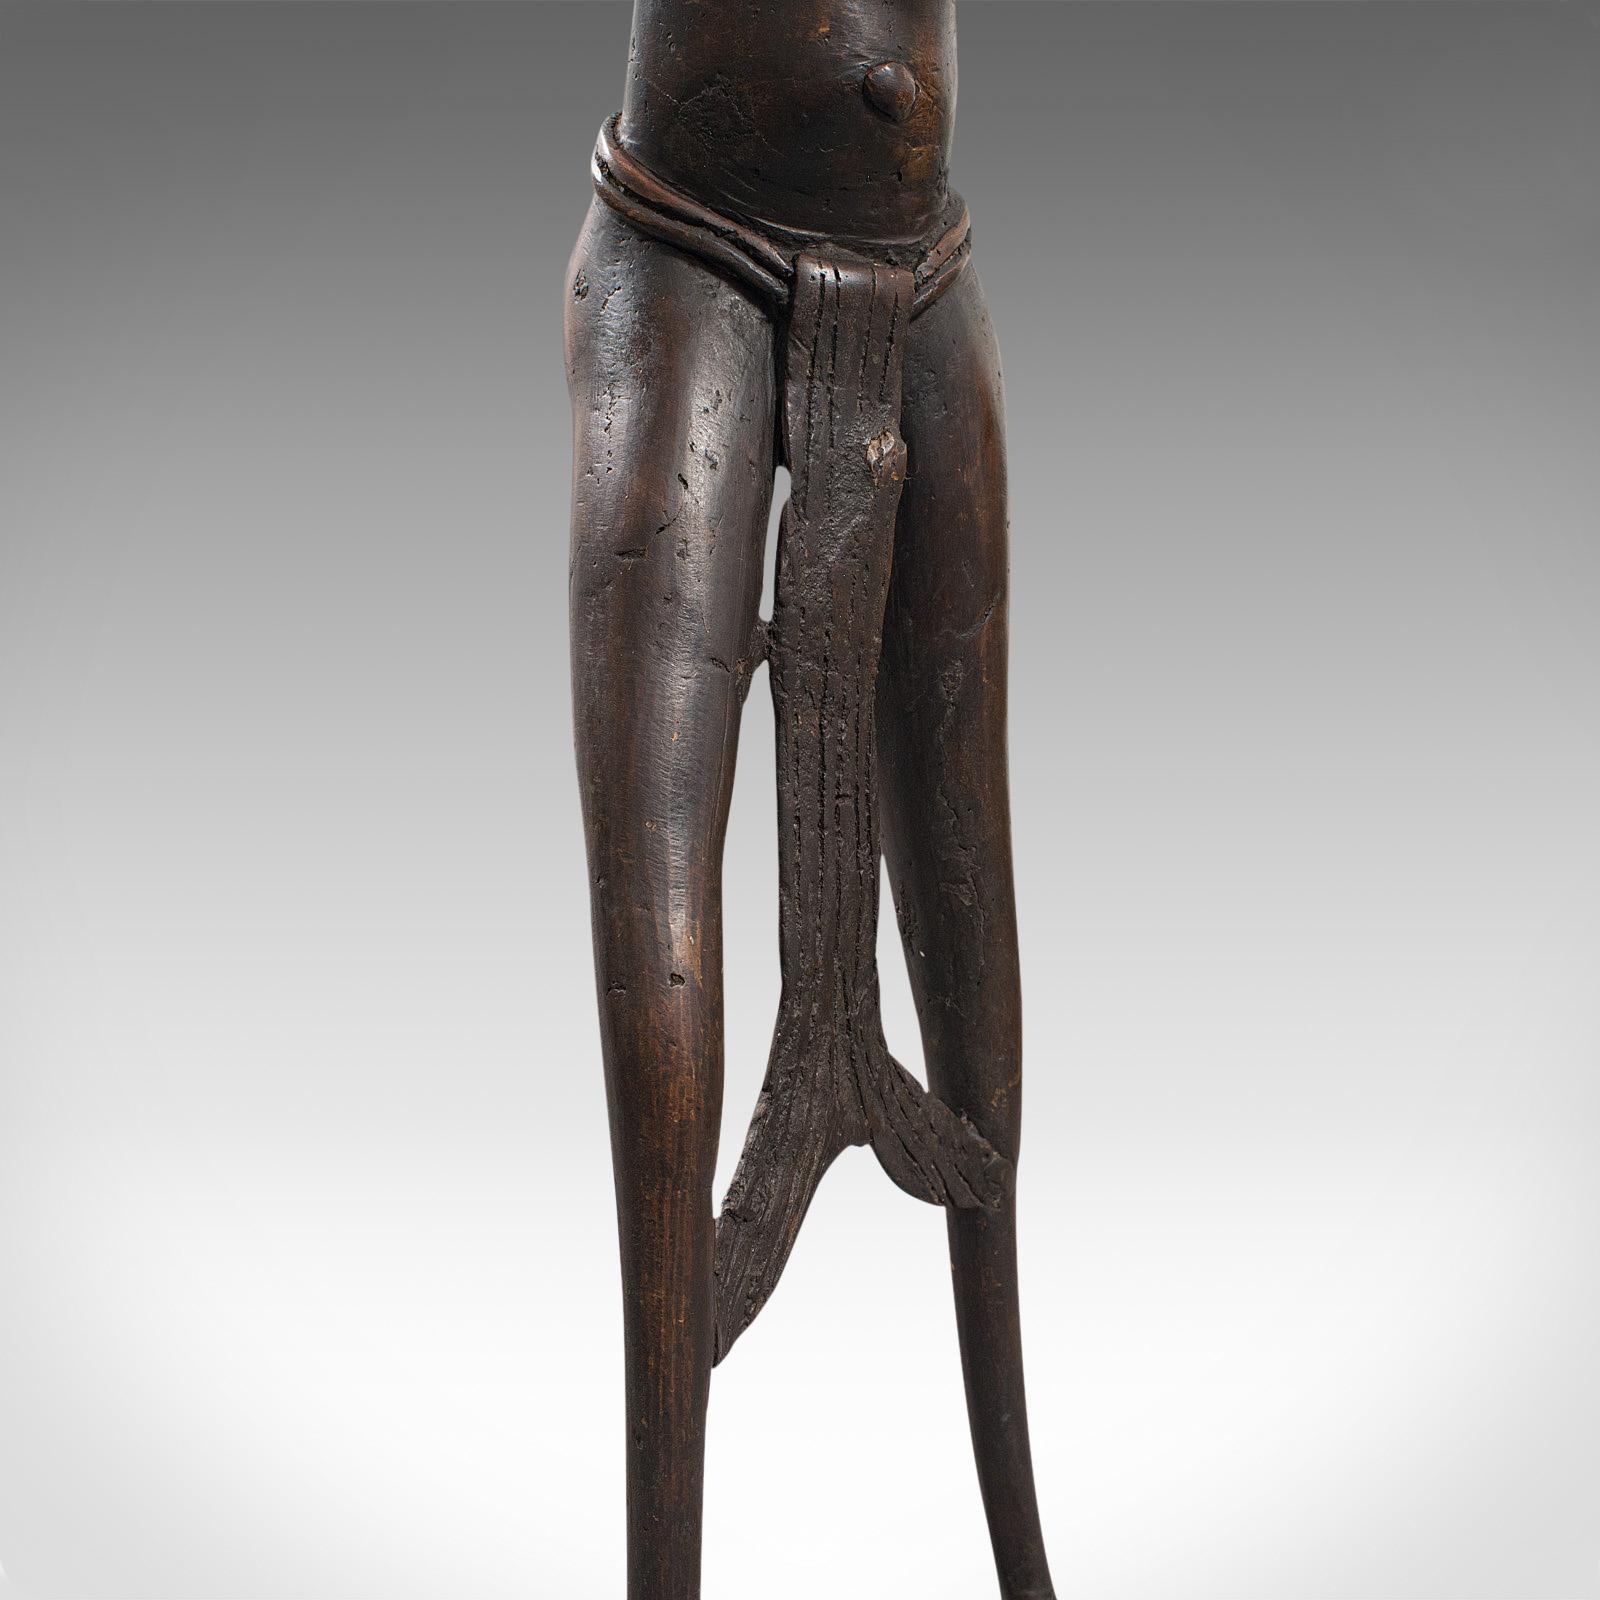 Tall Antique Tribal Figure, West African, Benin Kingdom, Female Statue For Sale 4